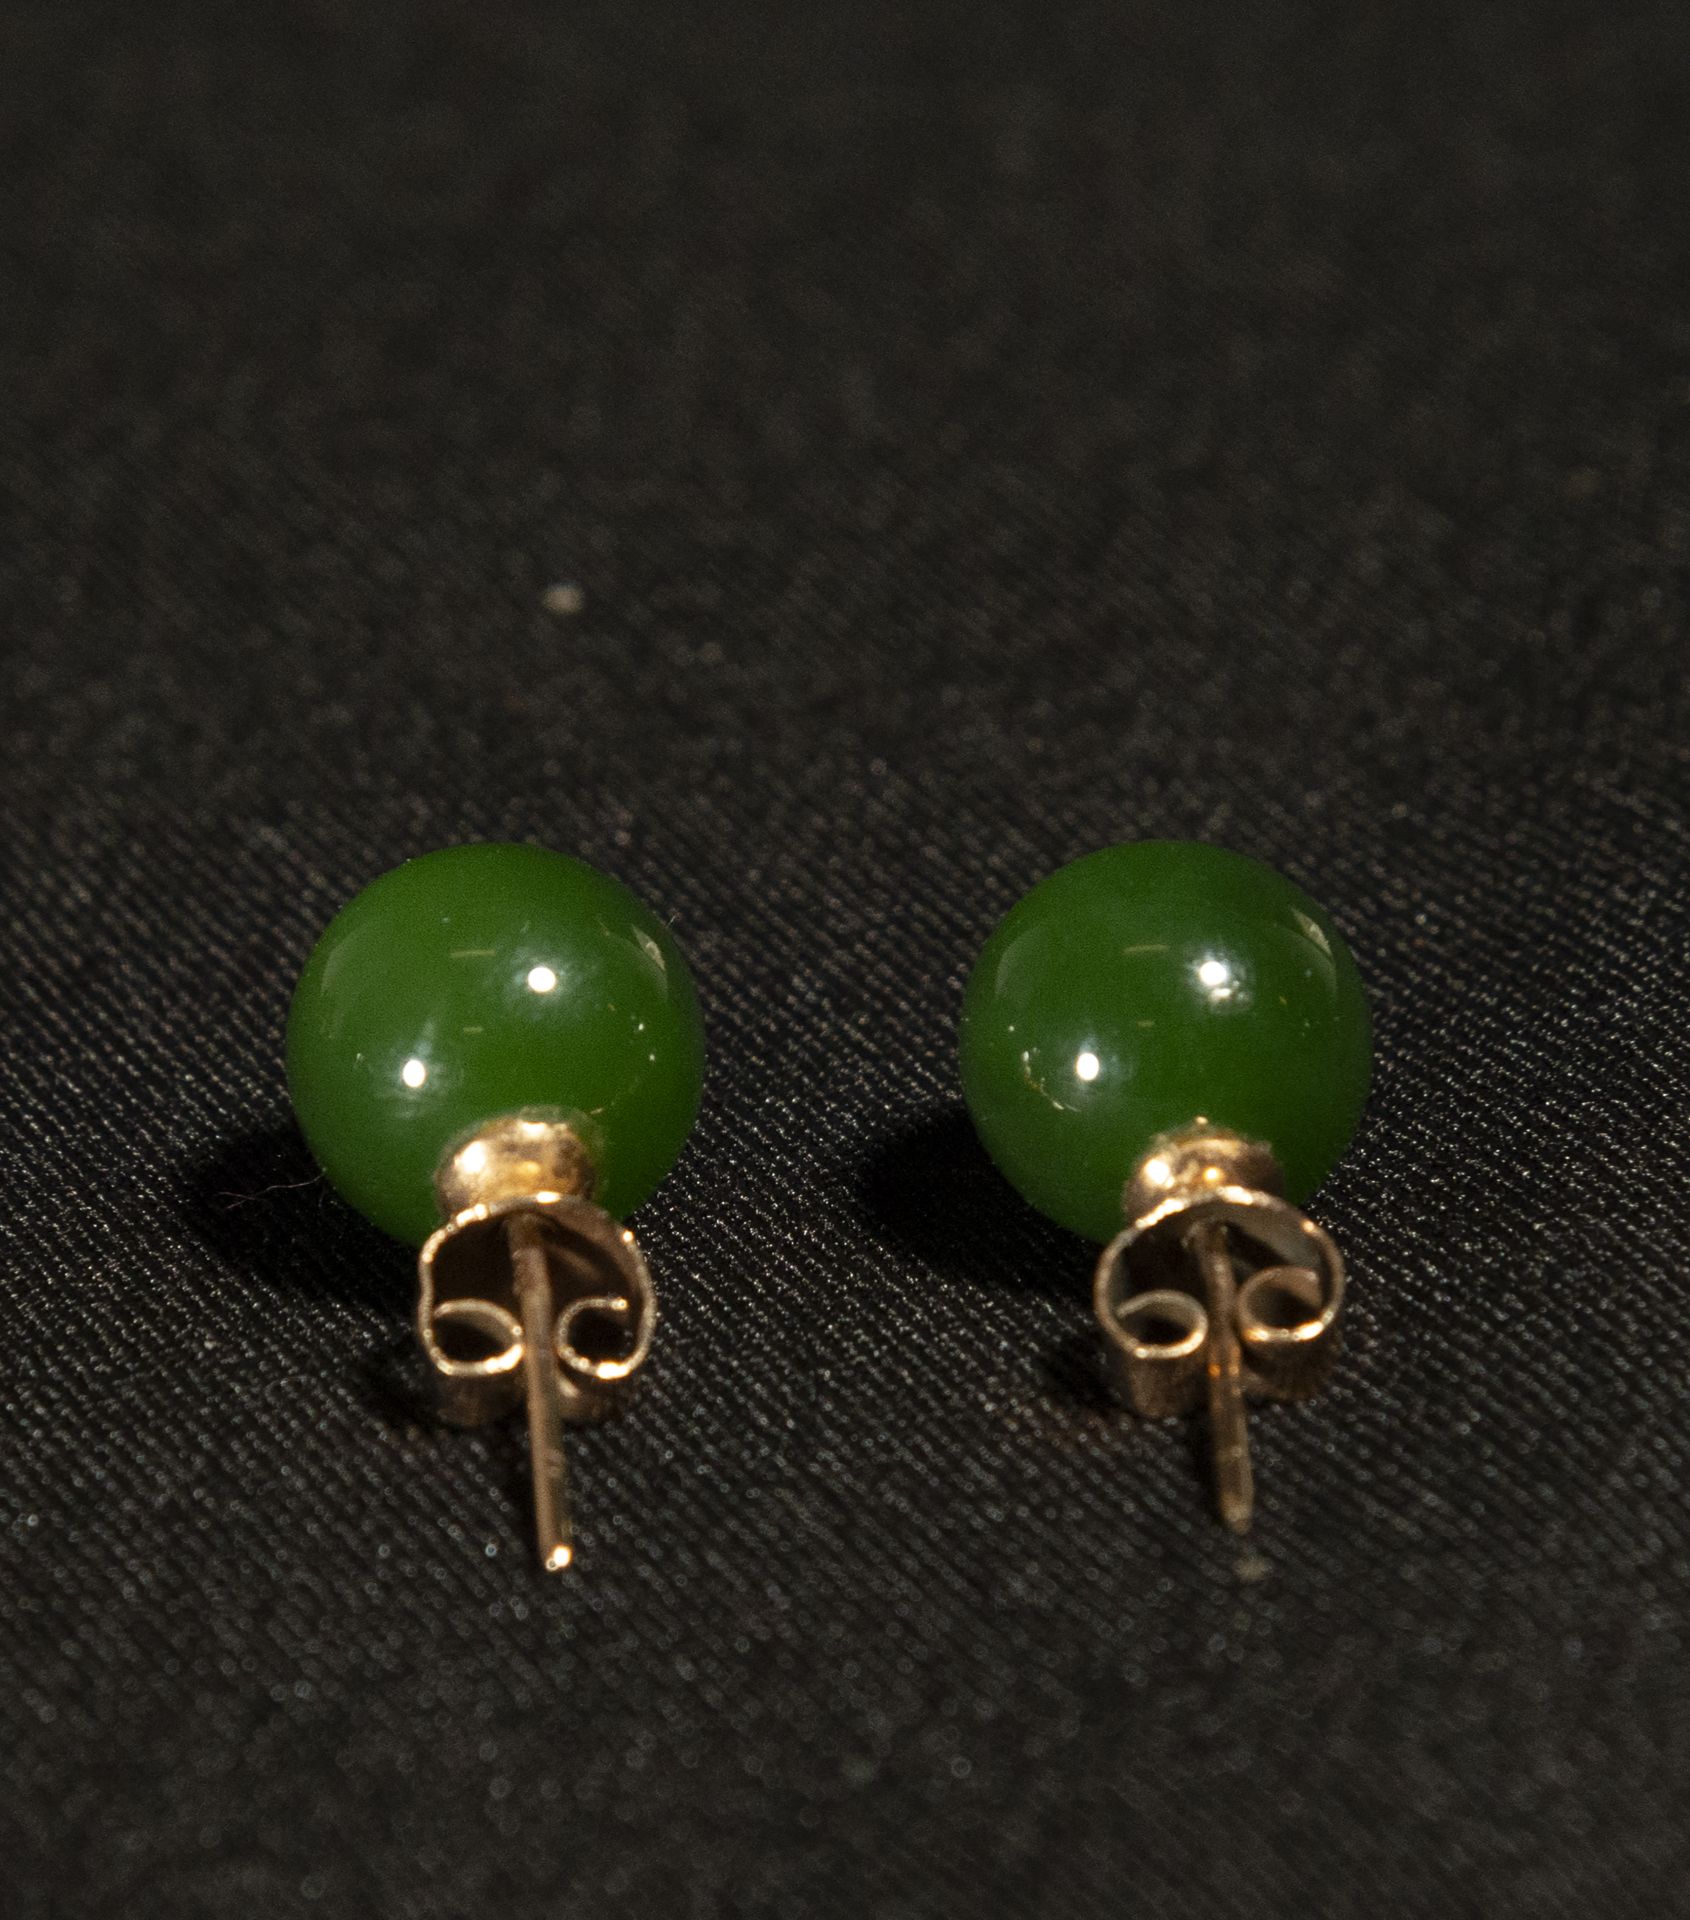 Beautiful set of ring and earrings in spinach green Chinese jade mounted in 18k gold - Image 7 of 8